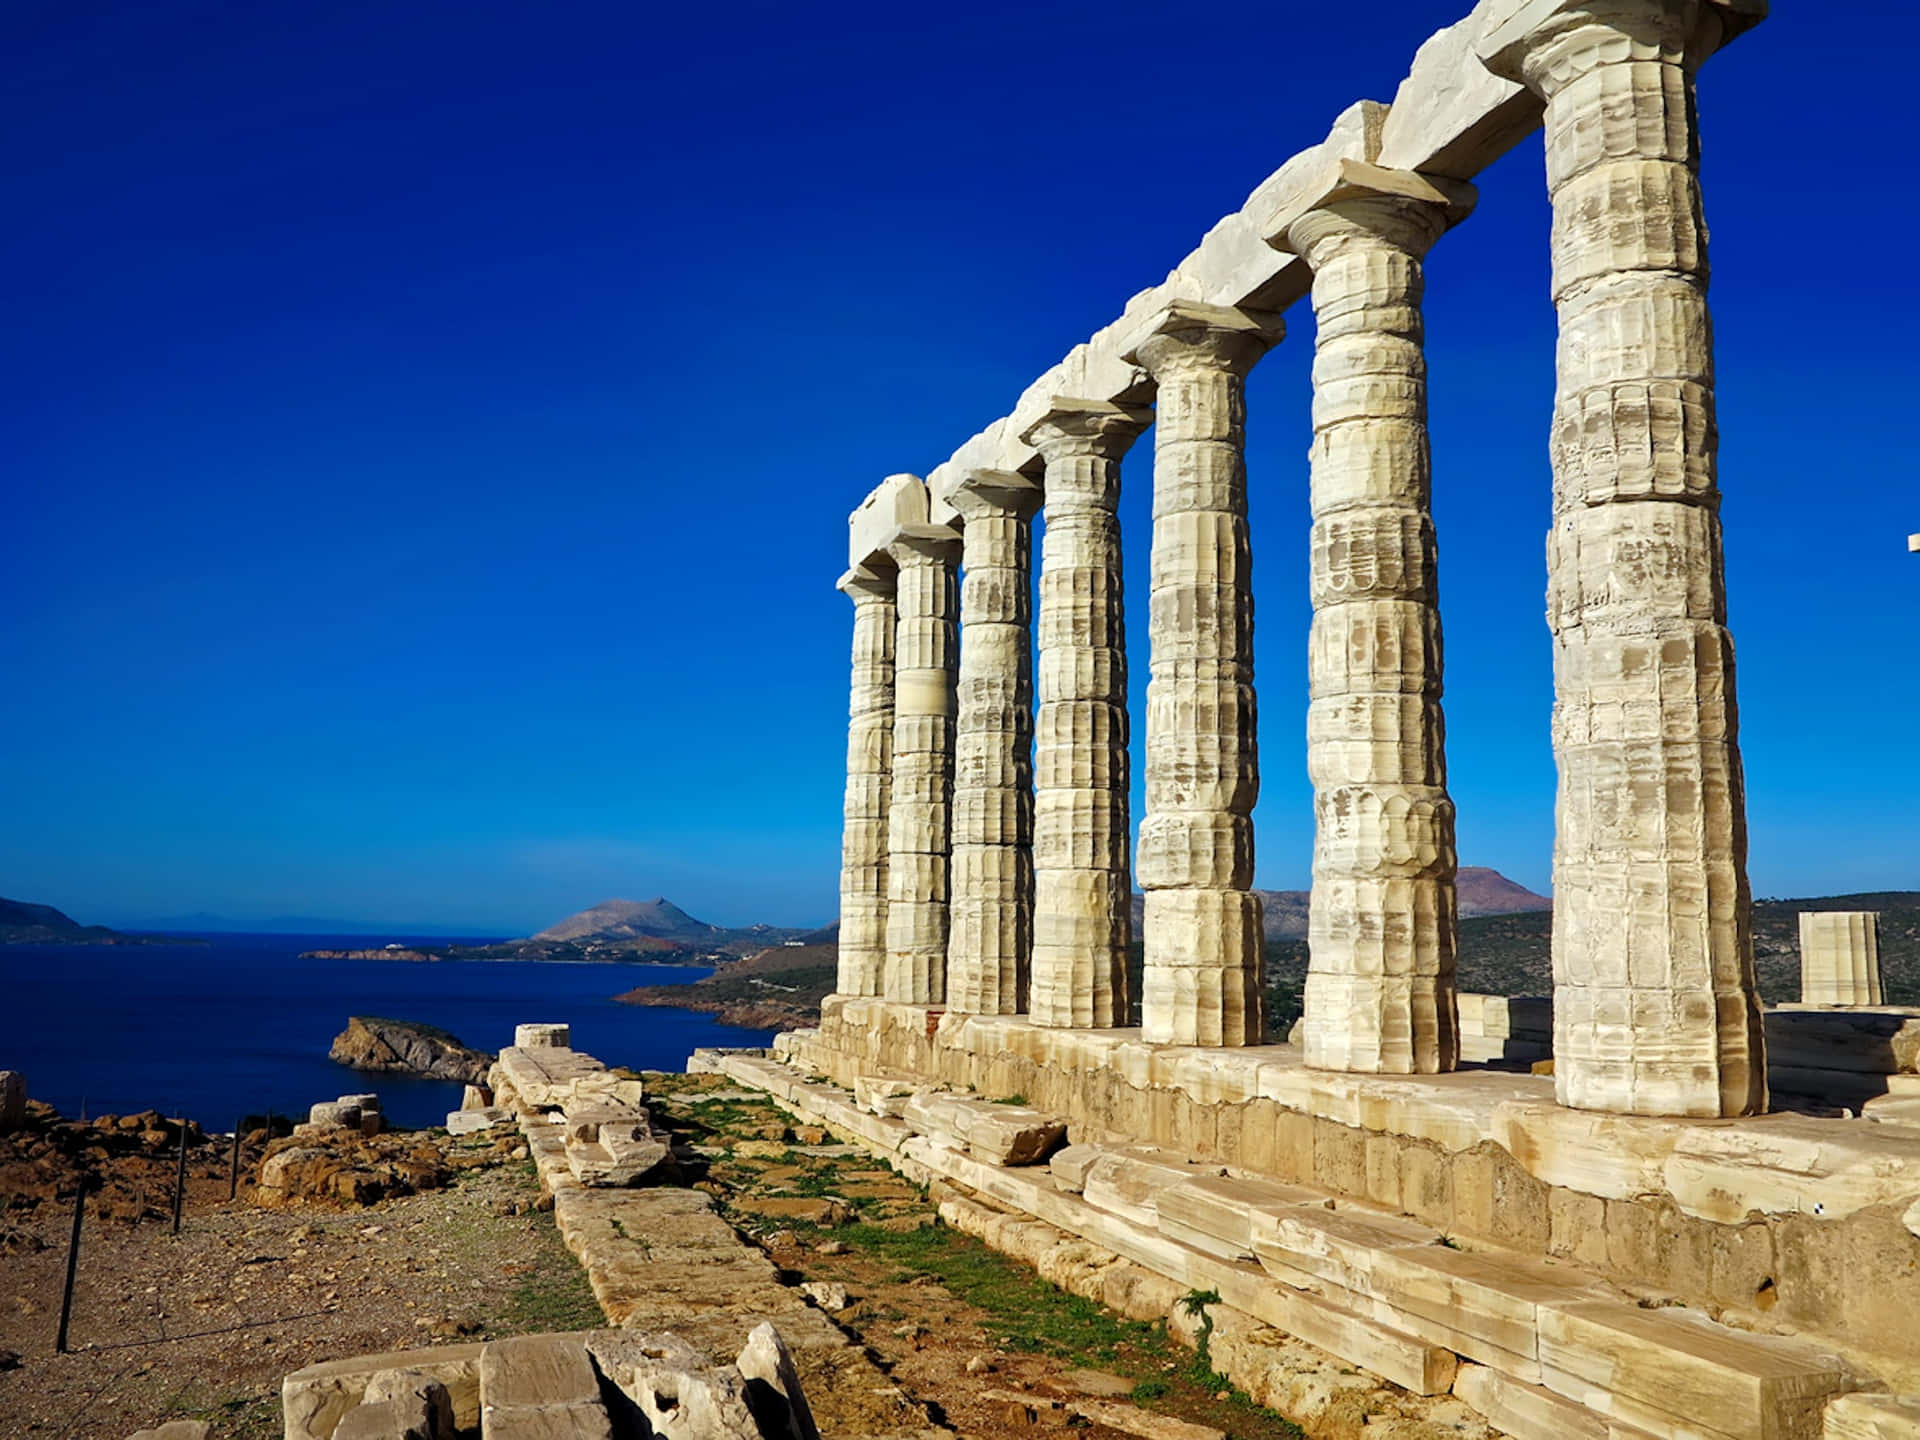 Caption: Majestic view of the Temple of Poseidon at Cape Sounion. Wallpaper